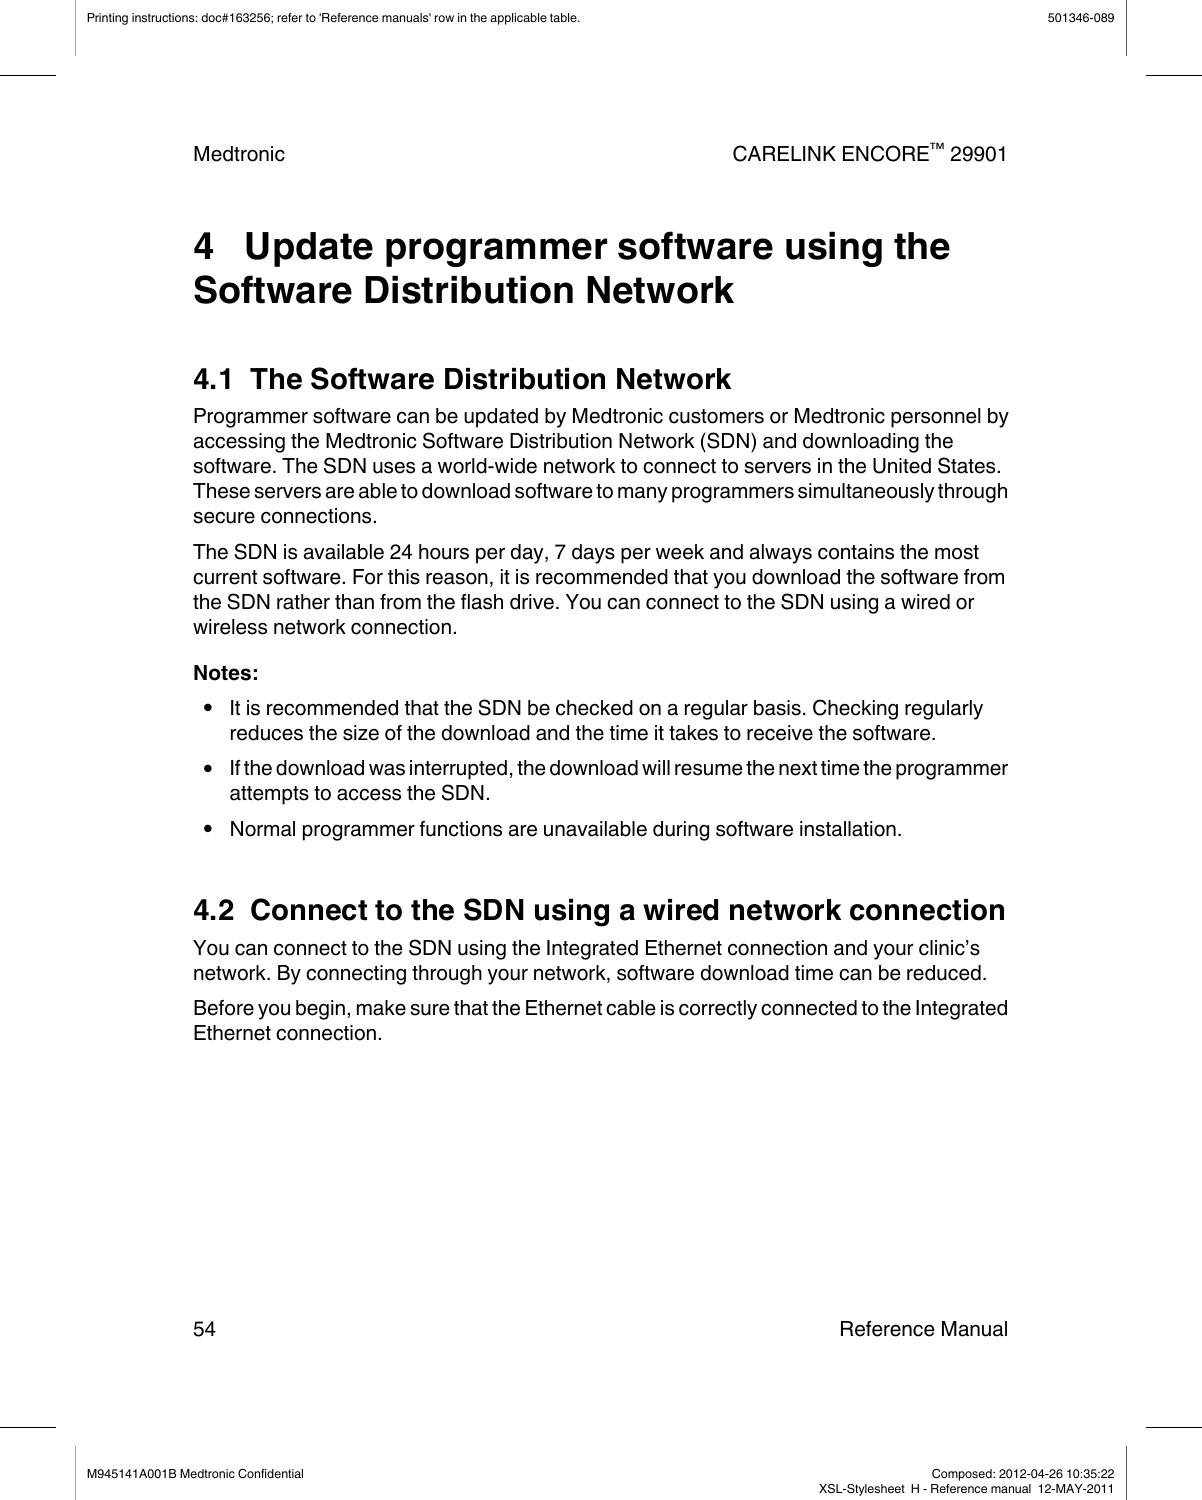 4   Update programmer software using theSoftware Distribution Network4.1  The Software Distribution NetworkProgrammer software can be updated by Medtronic customers or Medtronic personnel byaccessing the Medtronic Software Distribution Network (SDN) and downloading thesoftware. The SDN uses a world-wide network to connect to servers in the United States.These servers are able to download software to many programmers simultaneously throughsecure connections.The SDN is available 24 hours per day, 7 days per week and always contains the mostcurrent software. For this reason, it is recommended that you download the software fromthe SDN rather than from the flash drive. You can connect to the SDN using a wired orwireless network connection.Notes:●It is recommended that the SDN be checked on a regular basis. Checking regularlyreduces the size of the download and the time it takes to receive the software.●If the download was interrupted, the download will resume the next time the programmerattempts to access the SDN.●Normal programmer functions are unavailable during software installation.4.2  Connect to the SDN using a wired network connectionYou can connect to the SDN using the Integrated Ethernet connection and your clinic’snetwork. By connecting through your network, software download time can be reduced.Before you begin, make sure that the Ethernet cable is correctly connected to the IntegratedEthernet connection.Printing instructions: doc#163256; refer to &apos;Reference manuals&apos; row in the applicable table. 501346-089Medtronic CARELINK ENCORE™ 2990154 Reference ManualM945141A001B Medtronic Confidential   Composed: 2012-04-26 10:35:22XSL-Stylesheet  H - Reference manual  12-MAY-2011